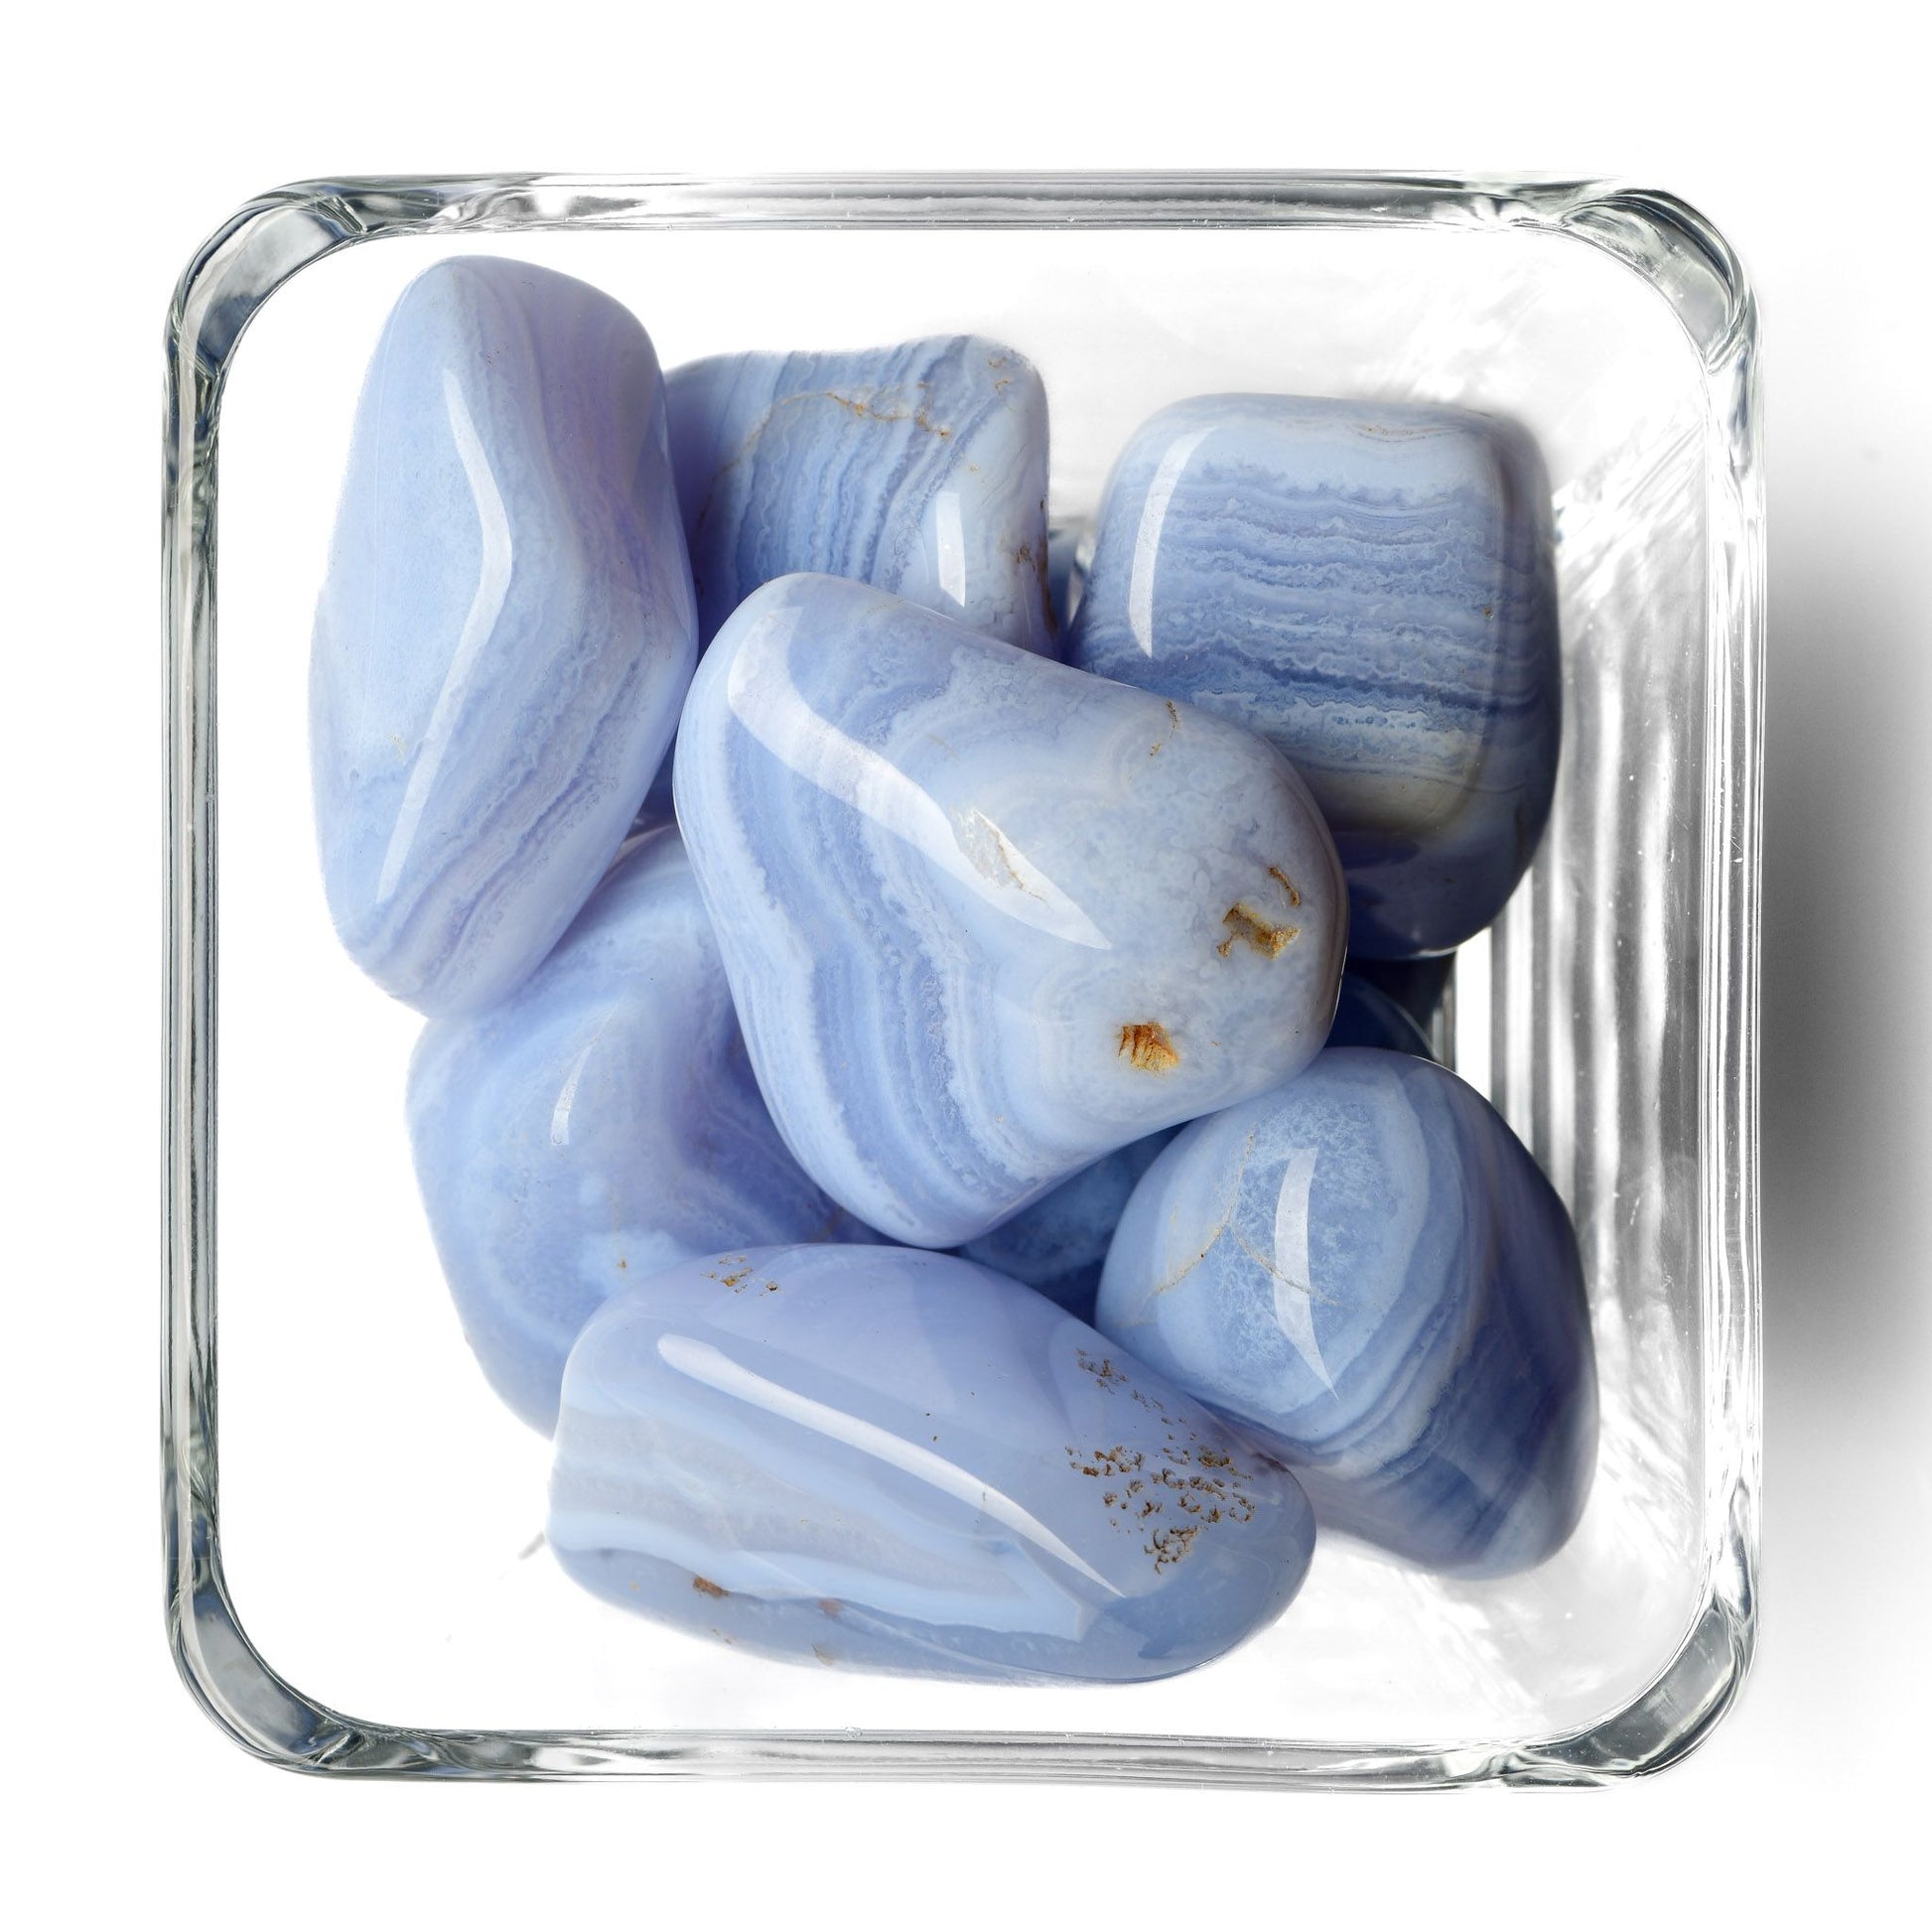 Blue Lace Agate Tumbled Stones - Polished - Small